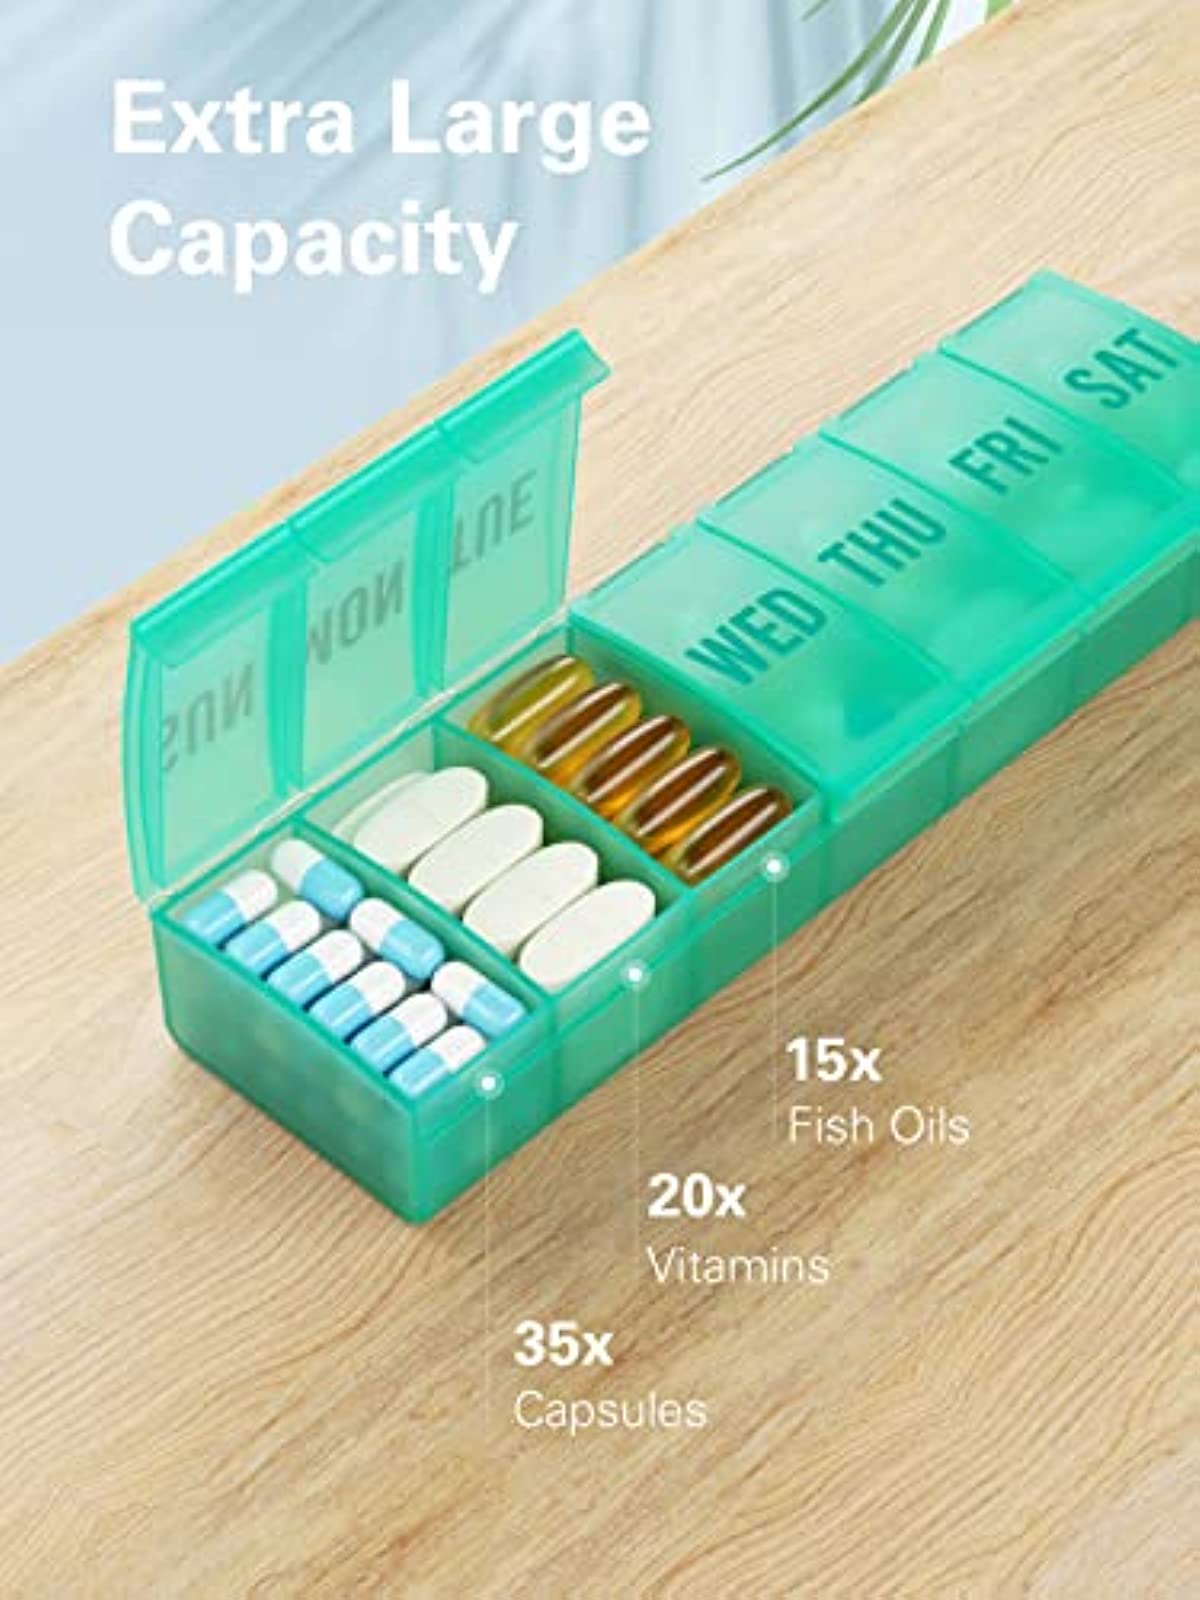 Large Pill Organizer Weekly, Barhon Vitamin Case Box Large Capacity Compartments, 7 Day Pill Containers for Medicine Supplements Fish Oil